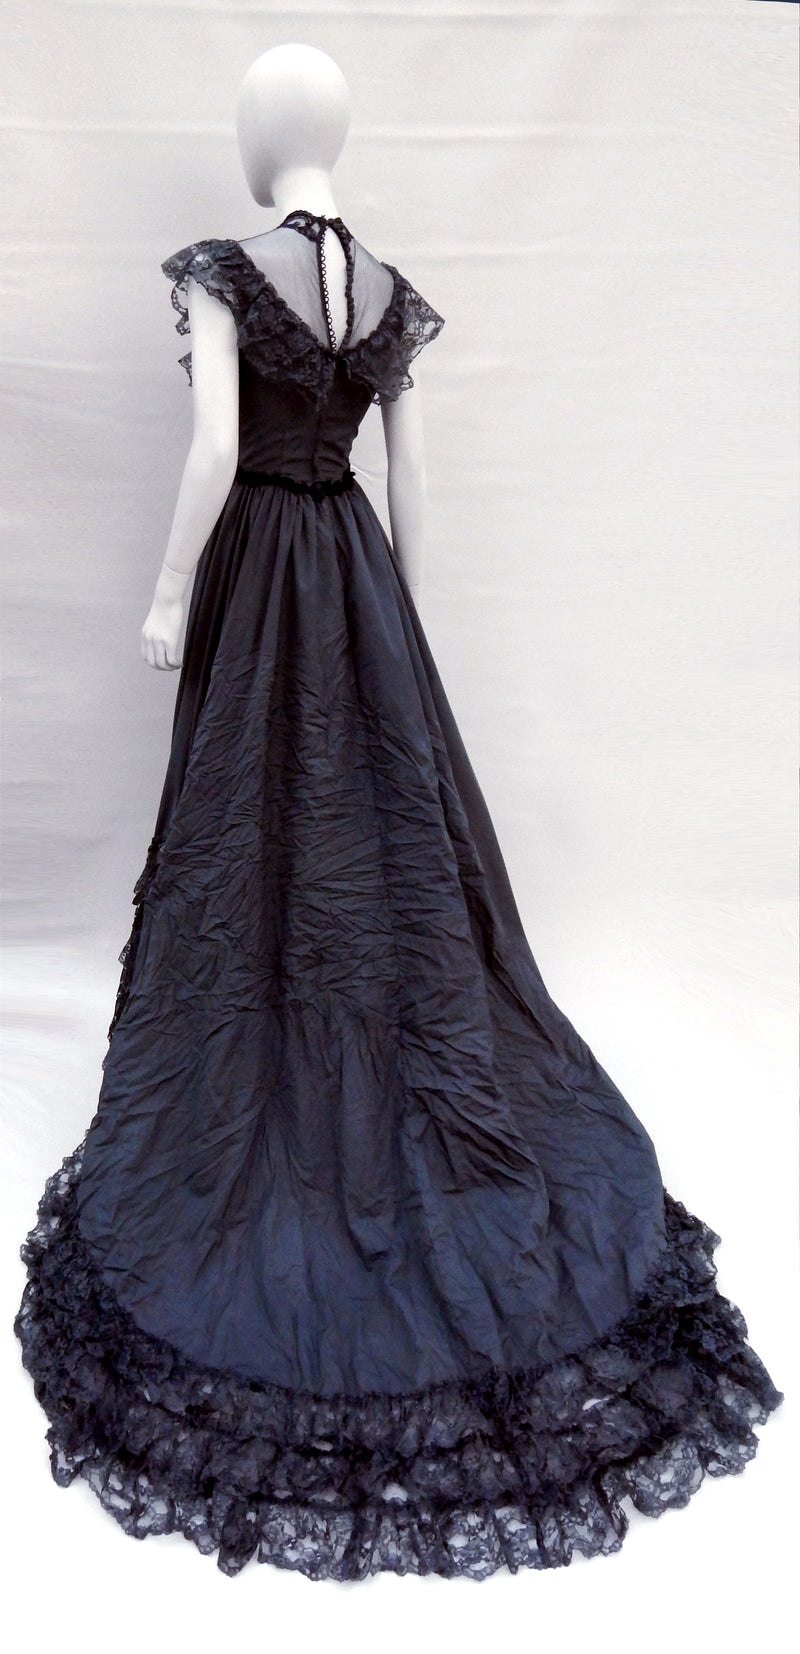 Upcycled Boho Vintage 70s 80s Black Bridal Gown sz 4 Wedding Dress Bridallure by Alfred Angelo